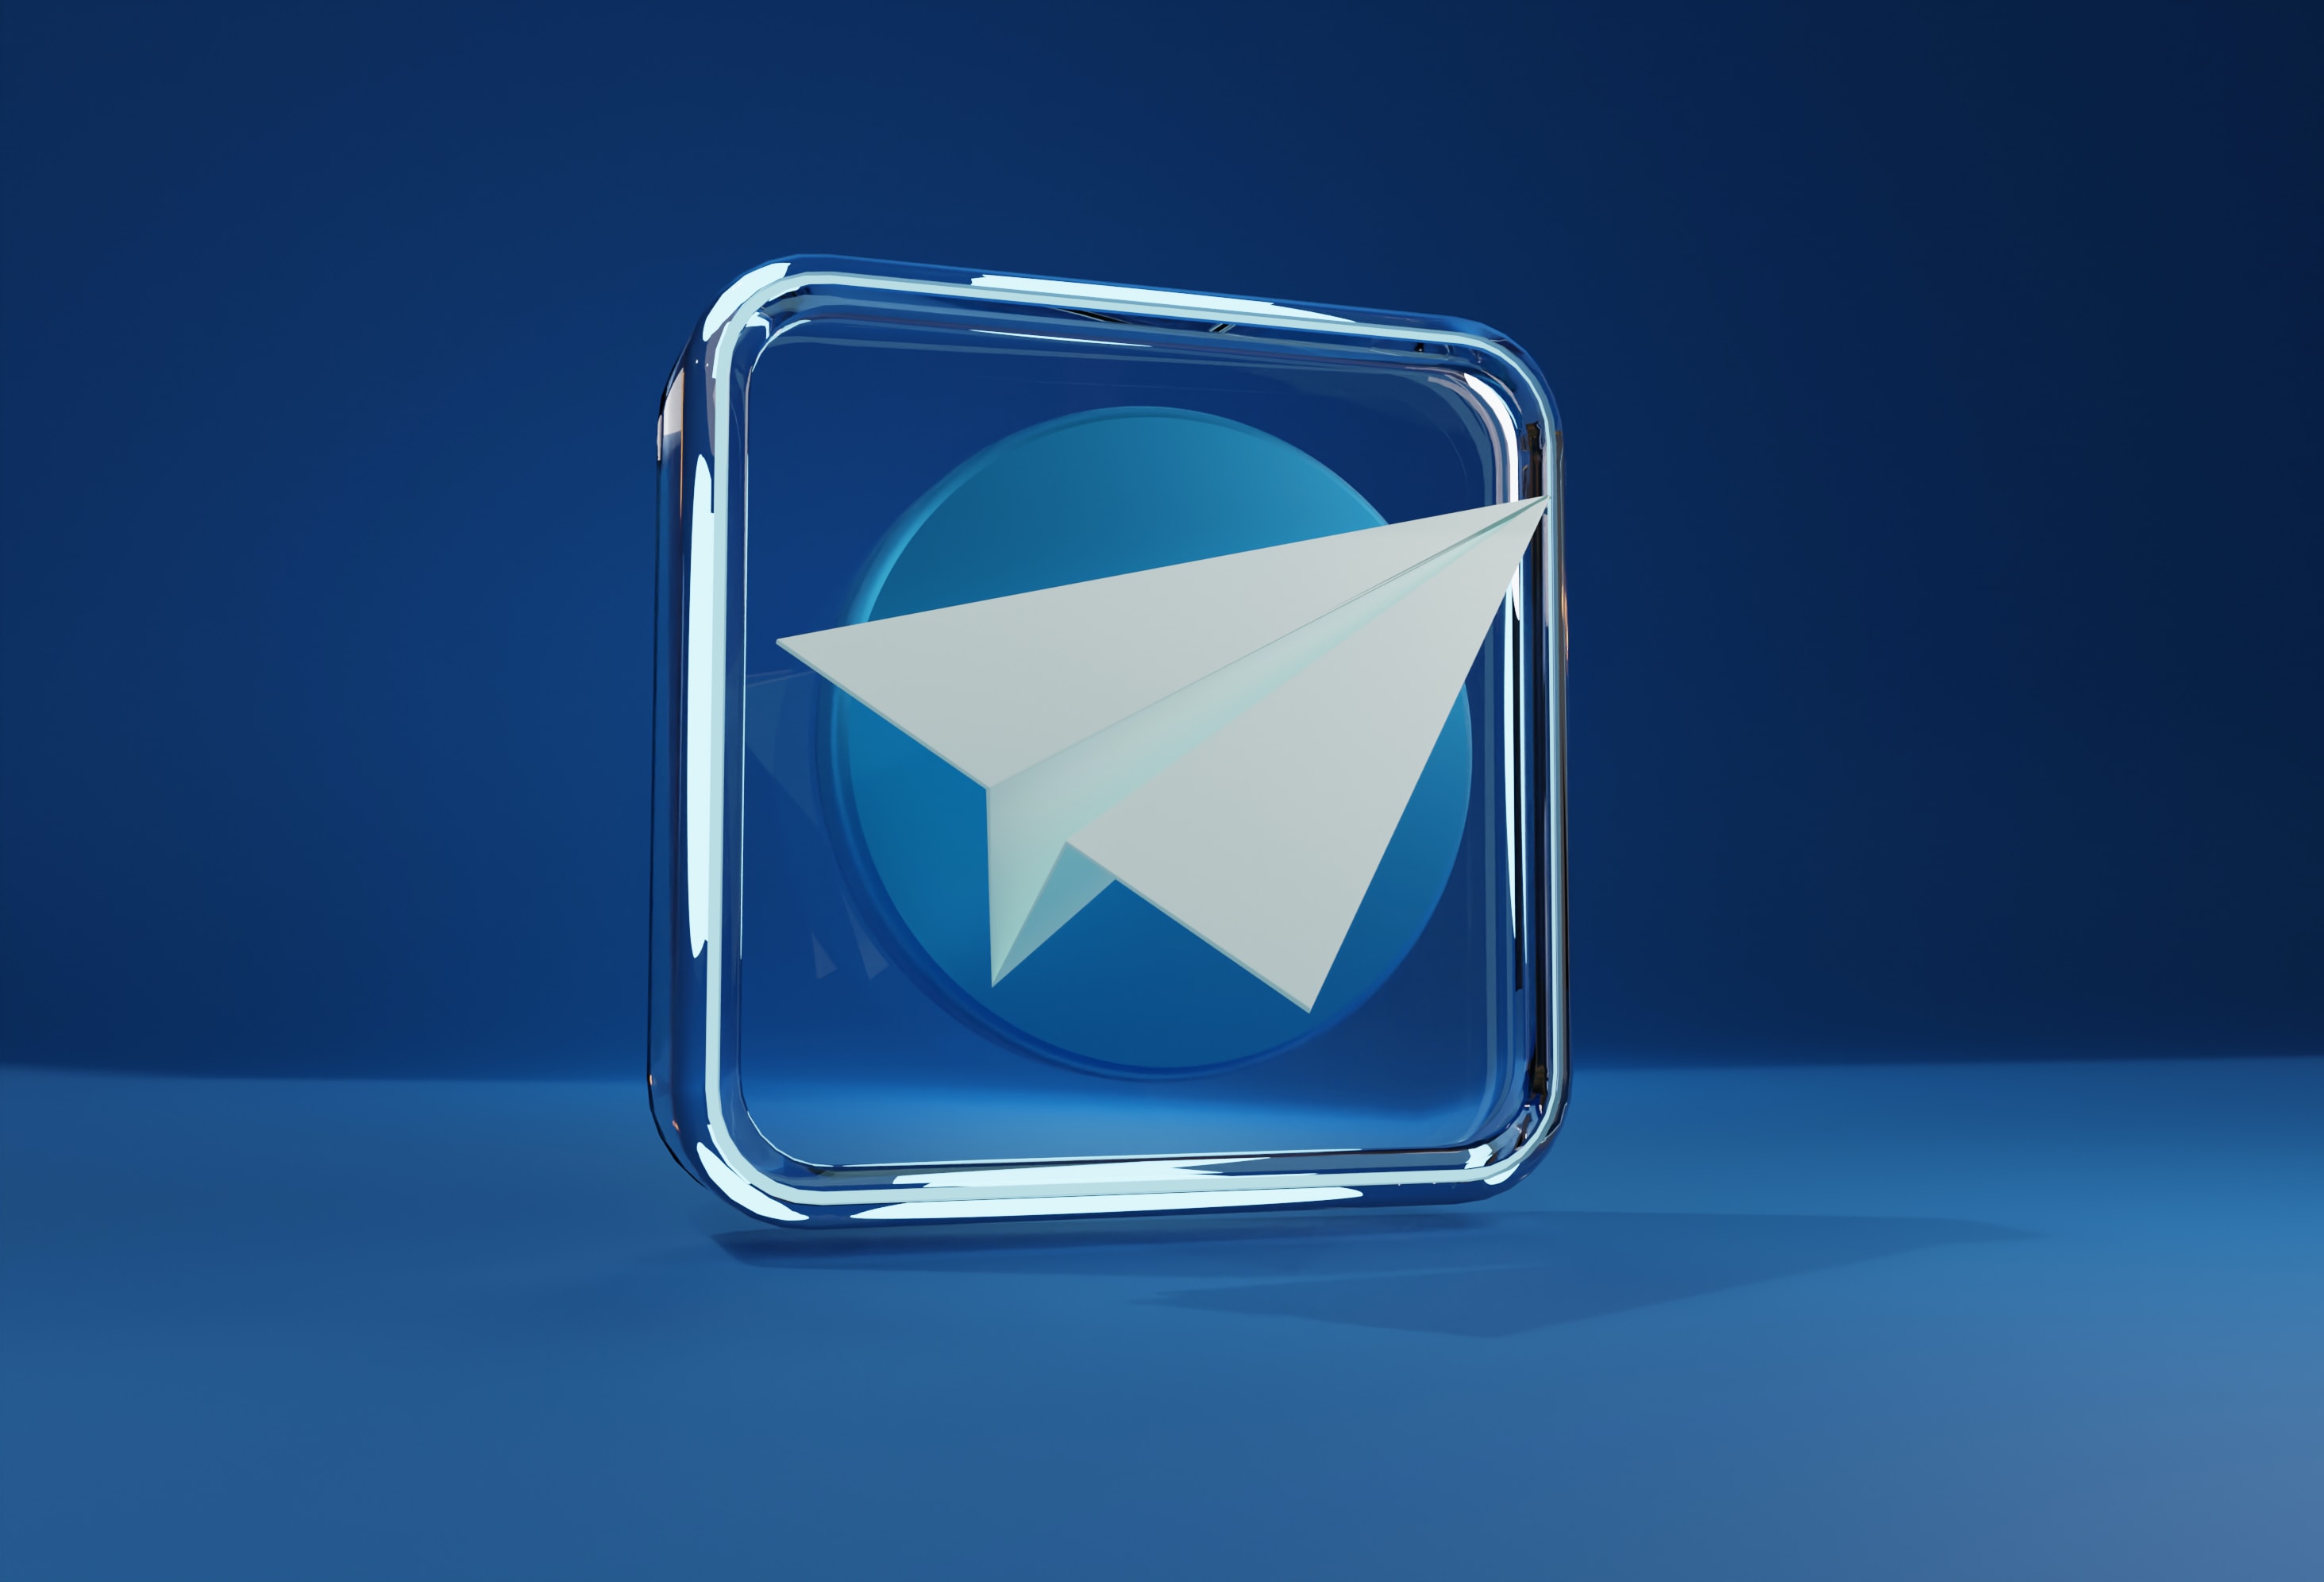 Unlocking a comprehensive guide to help understand more about the Telegram Platform